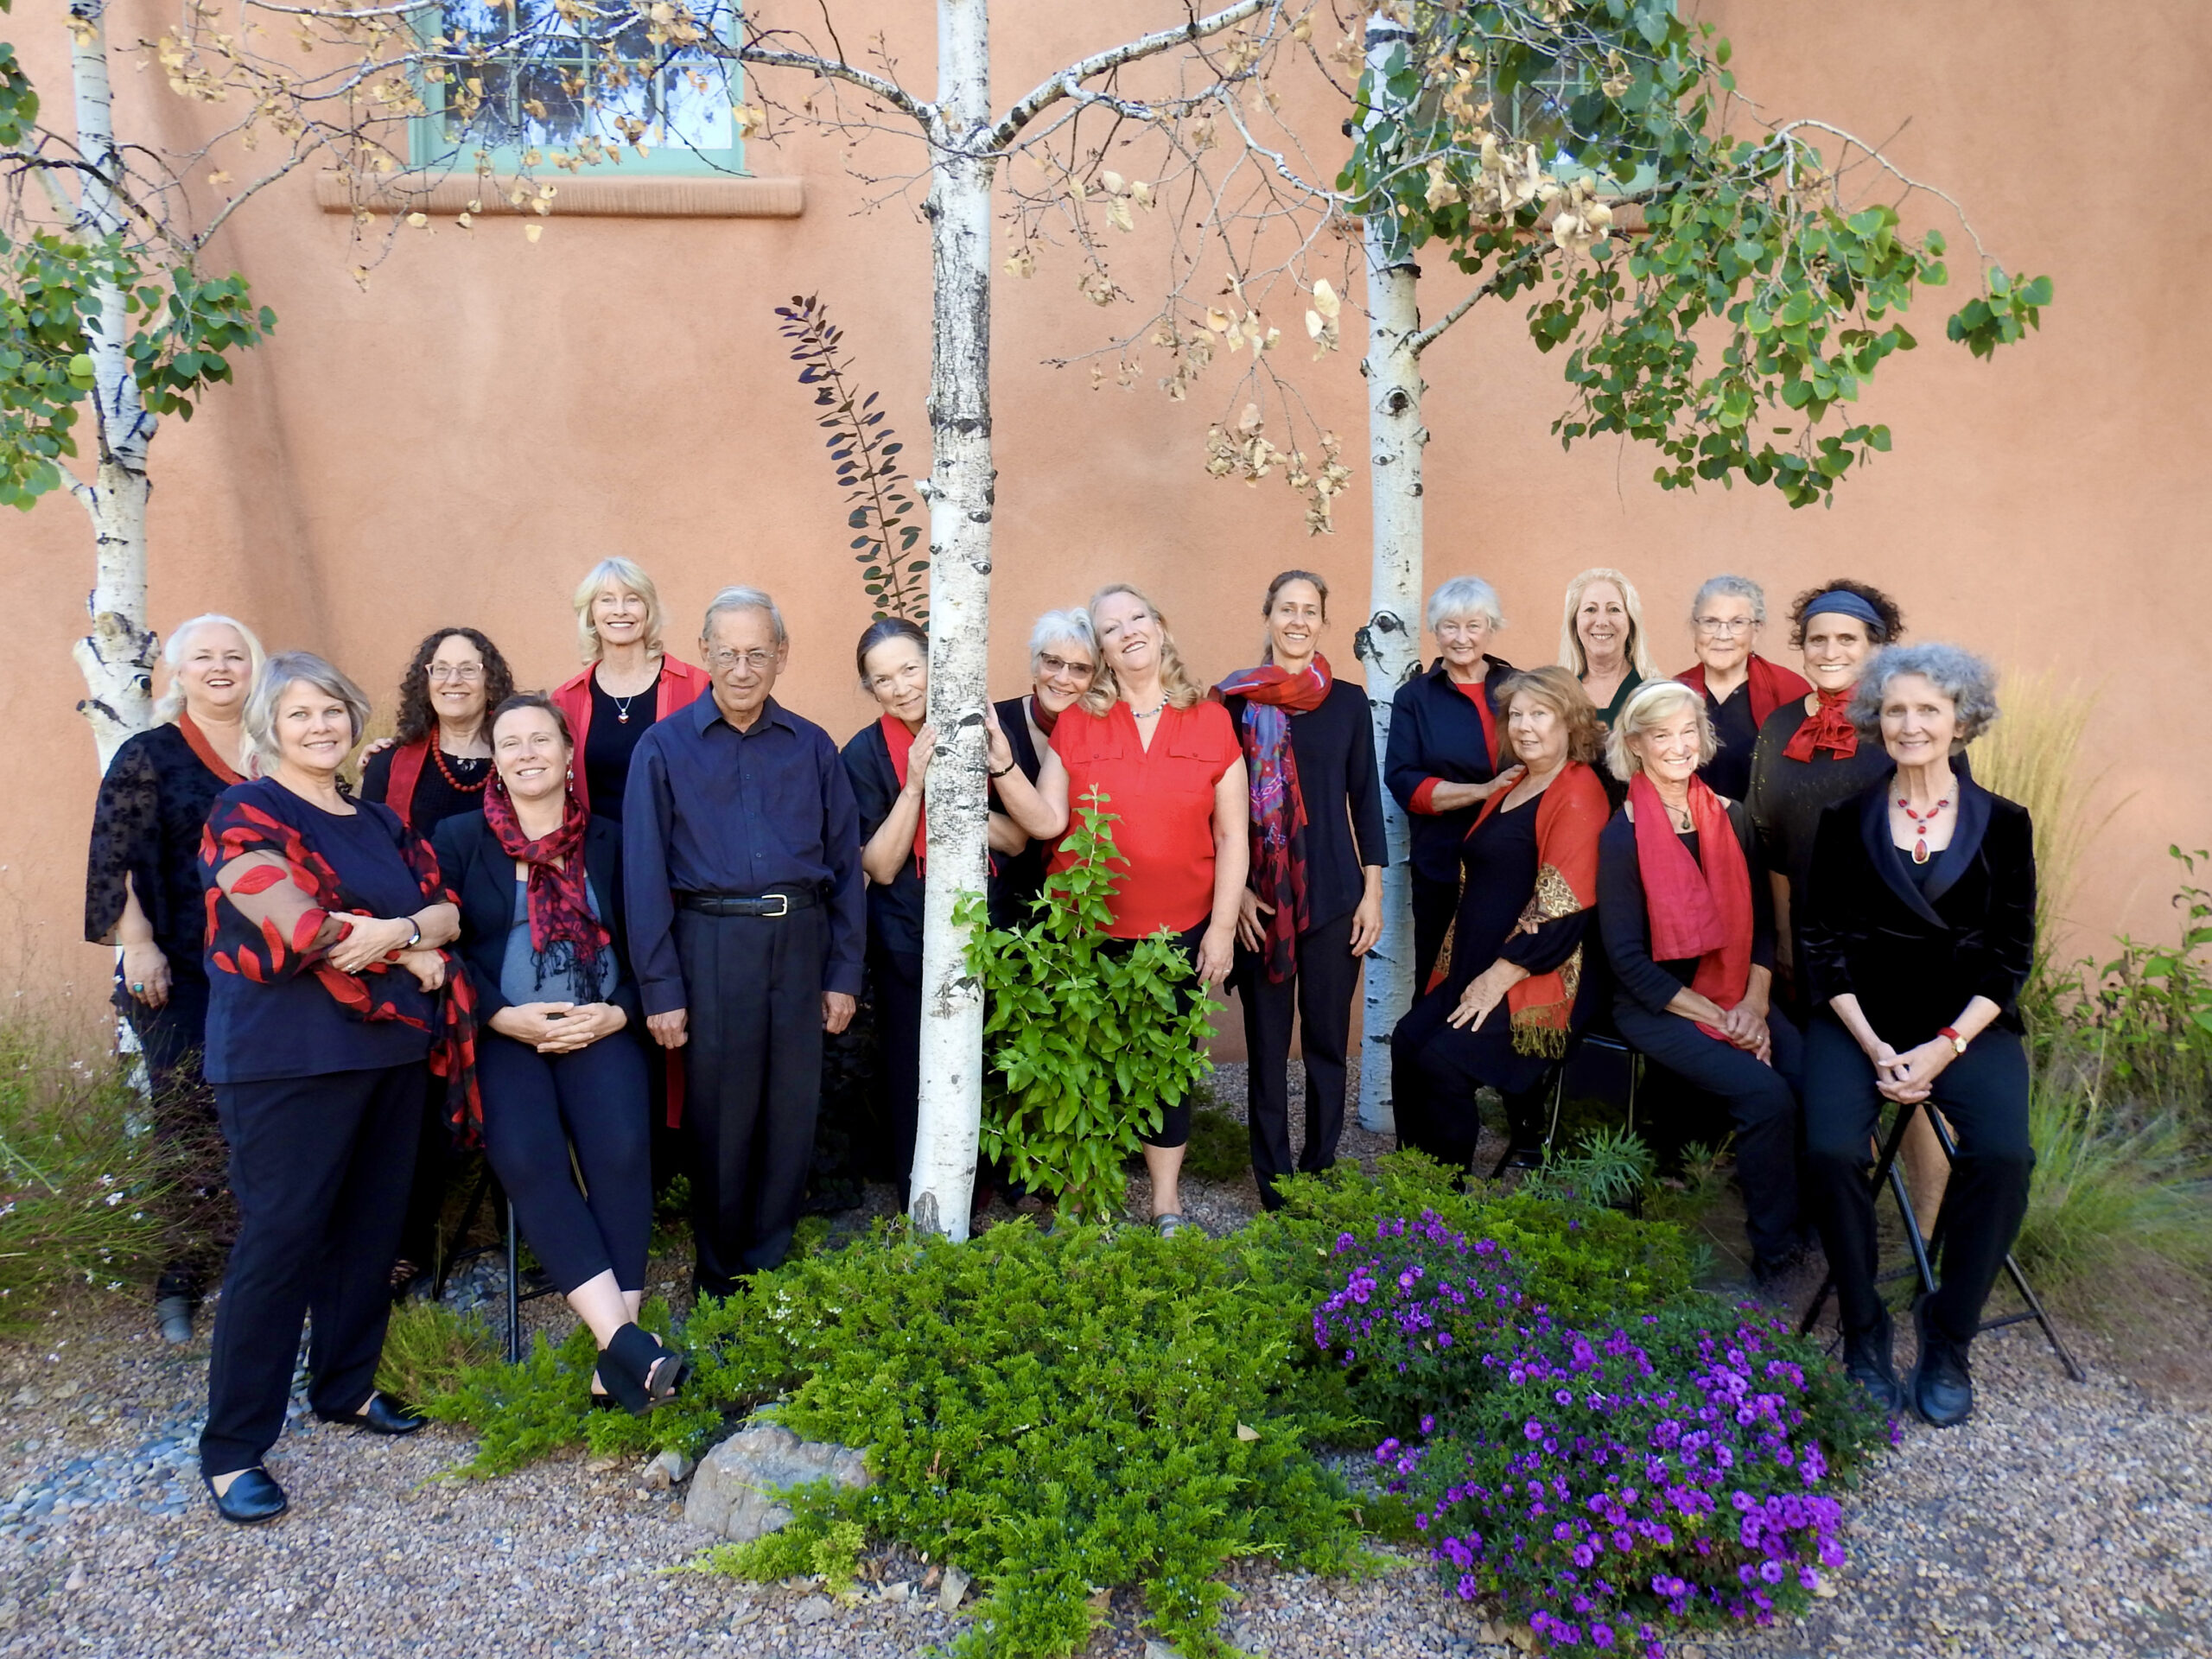 Ensemble members, wearing black with red scarves, standing amongst aspens 